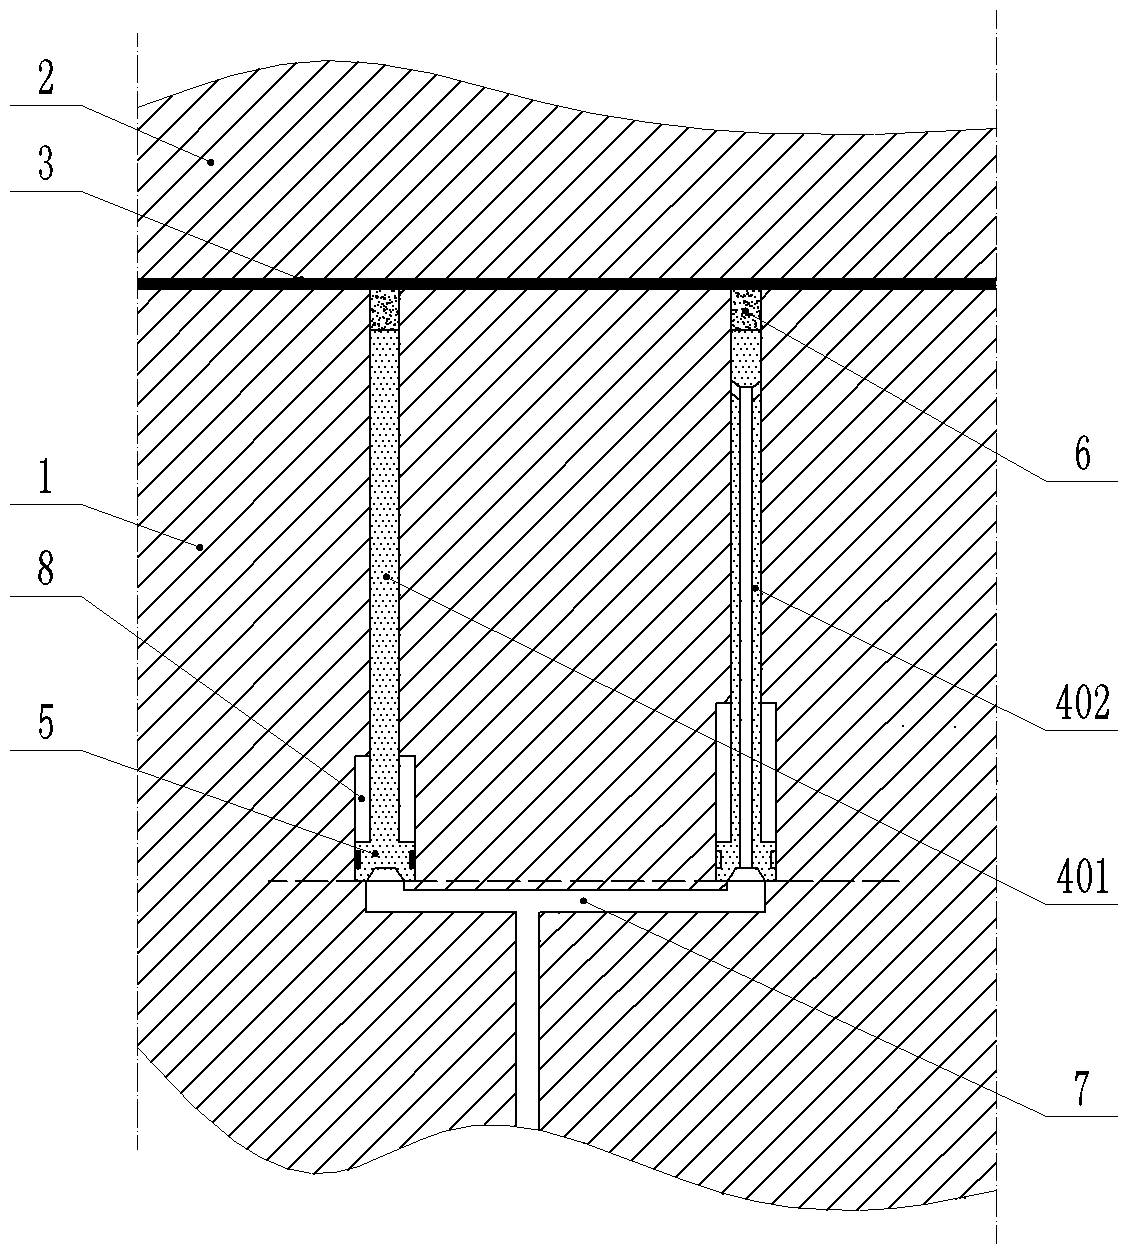 Secondary ejection mechanism for complex plastic product structure